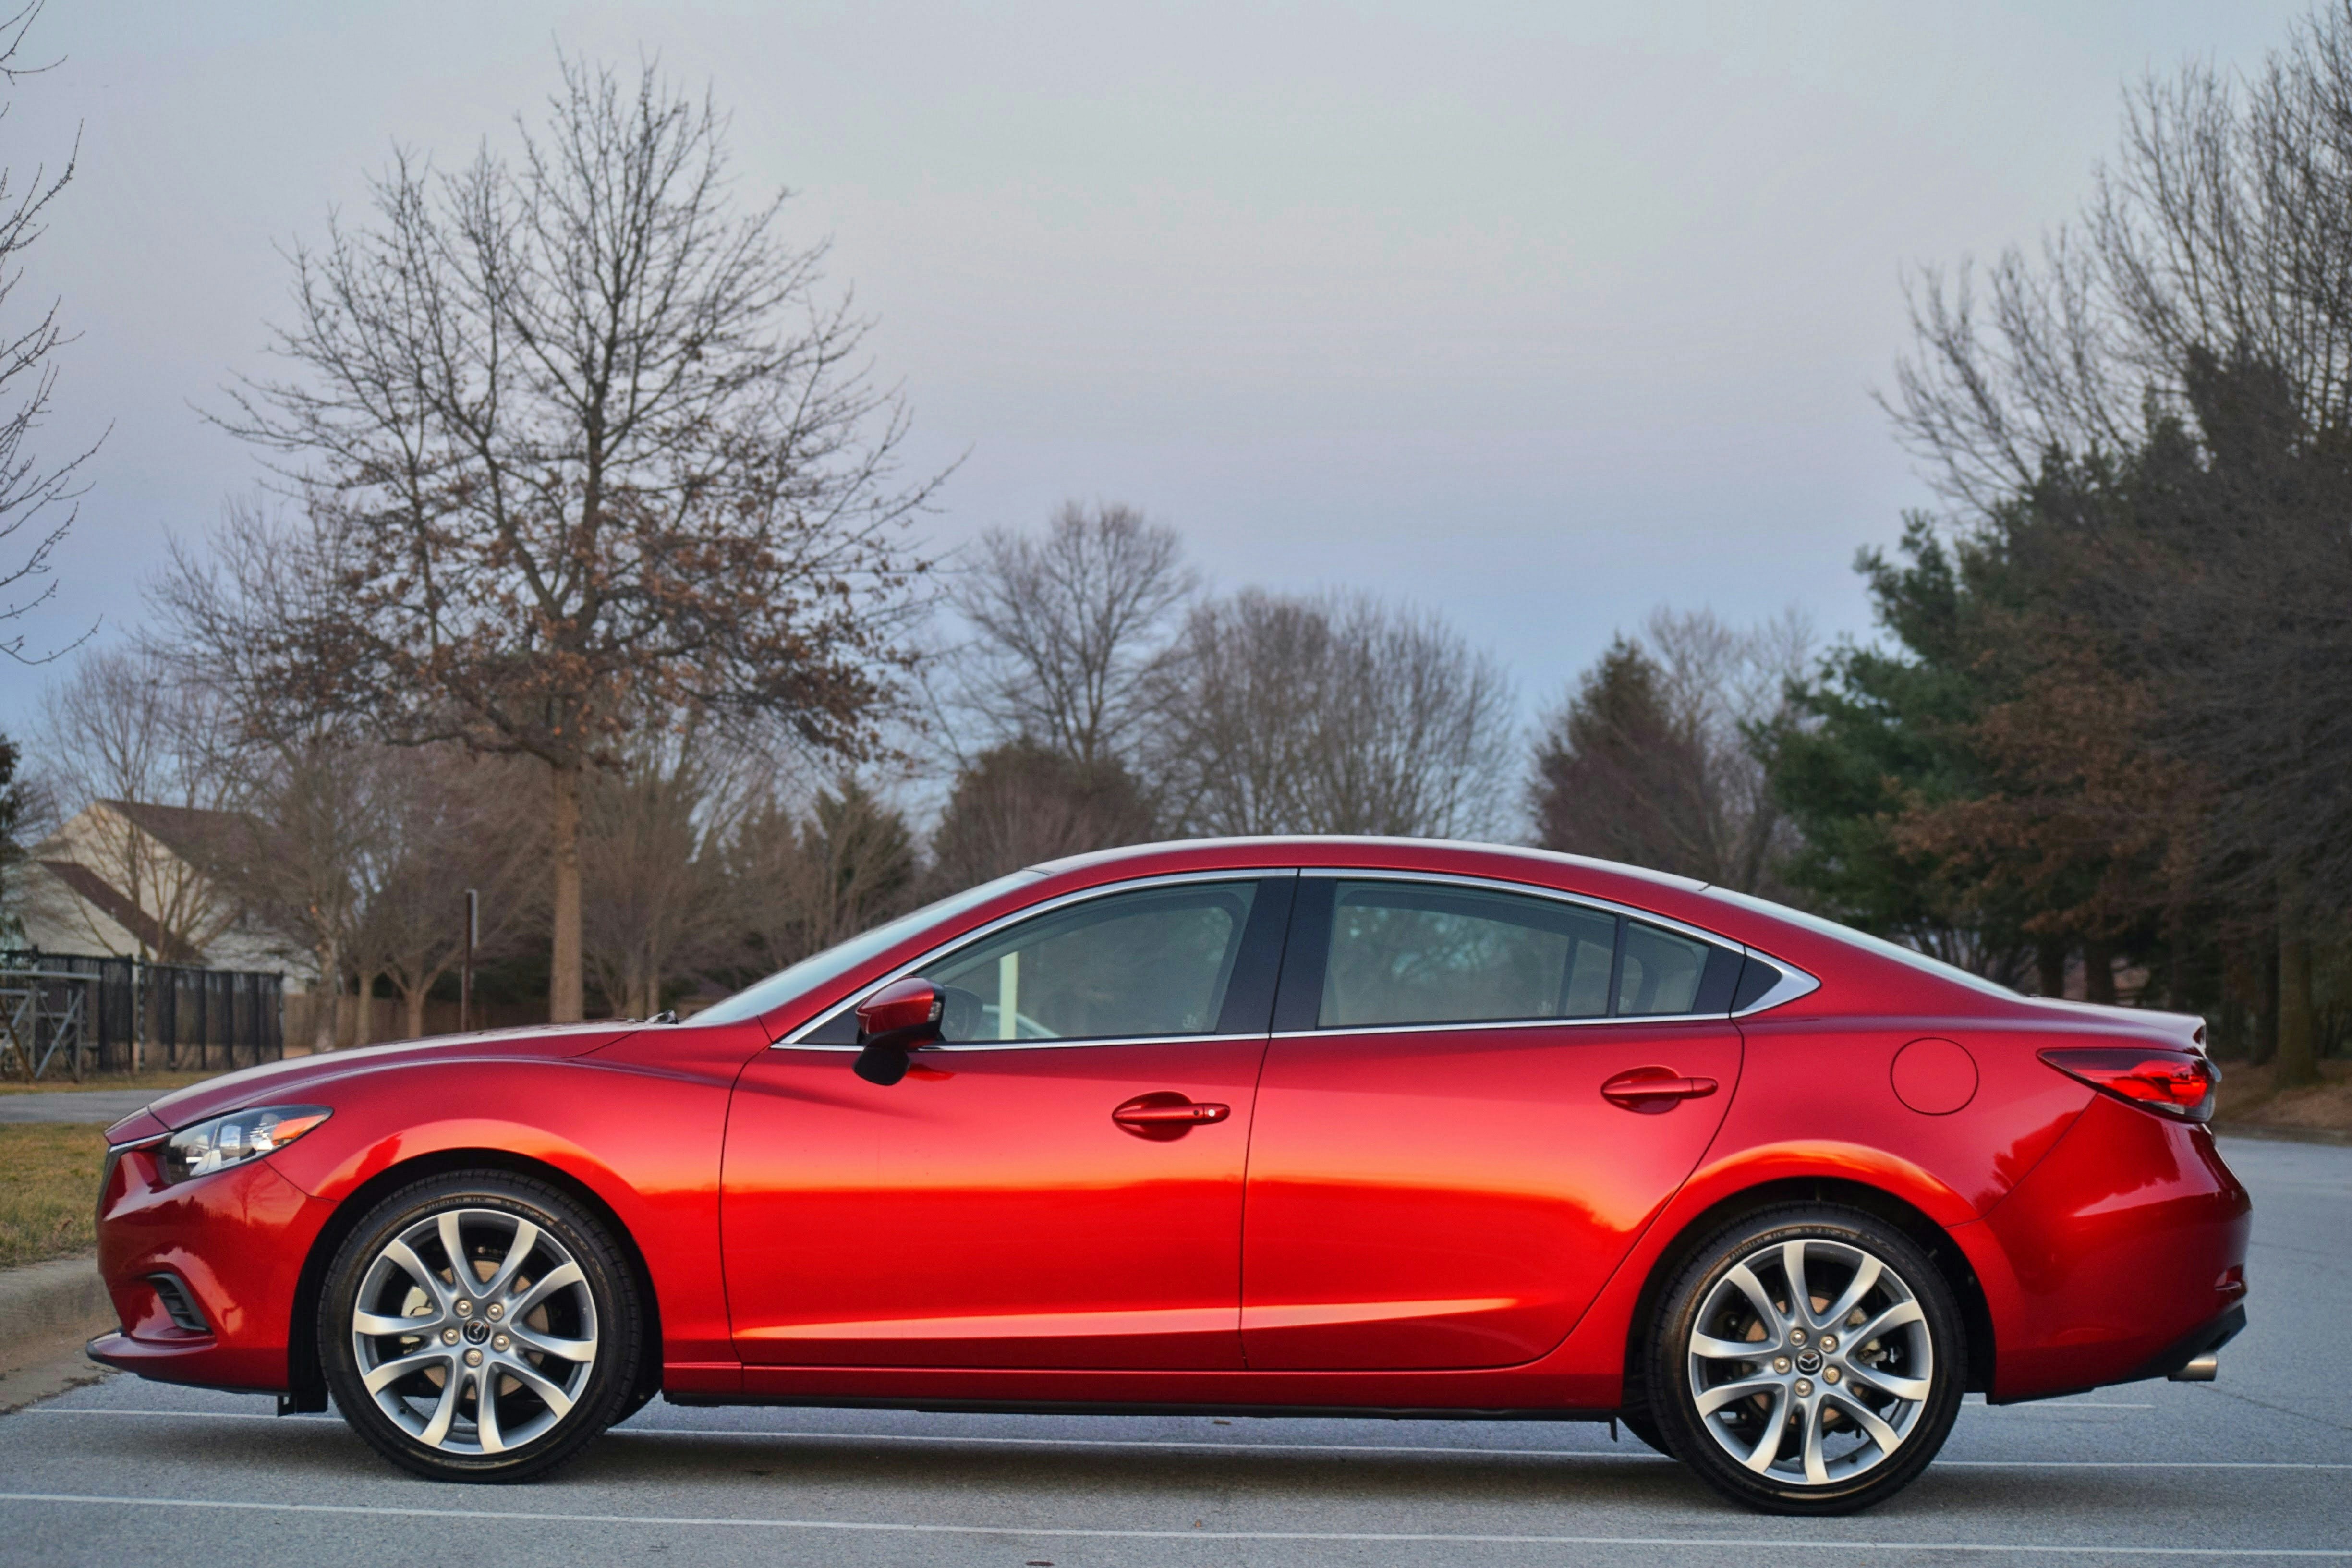 Our first car holds a special place in our hearts. Mazda 6 in soul red.